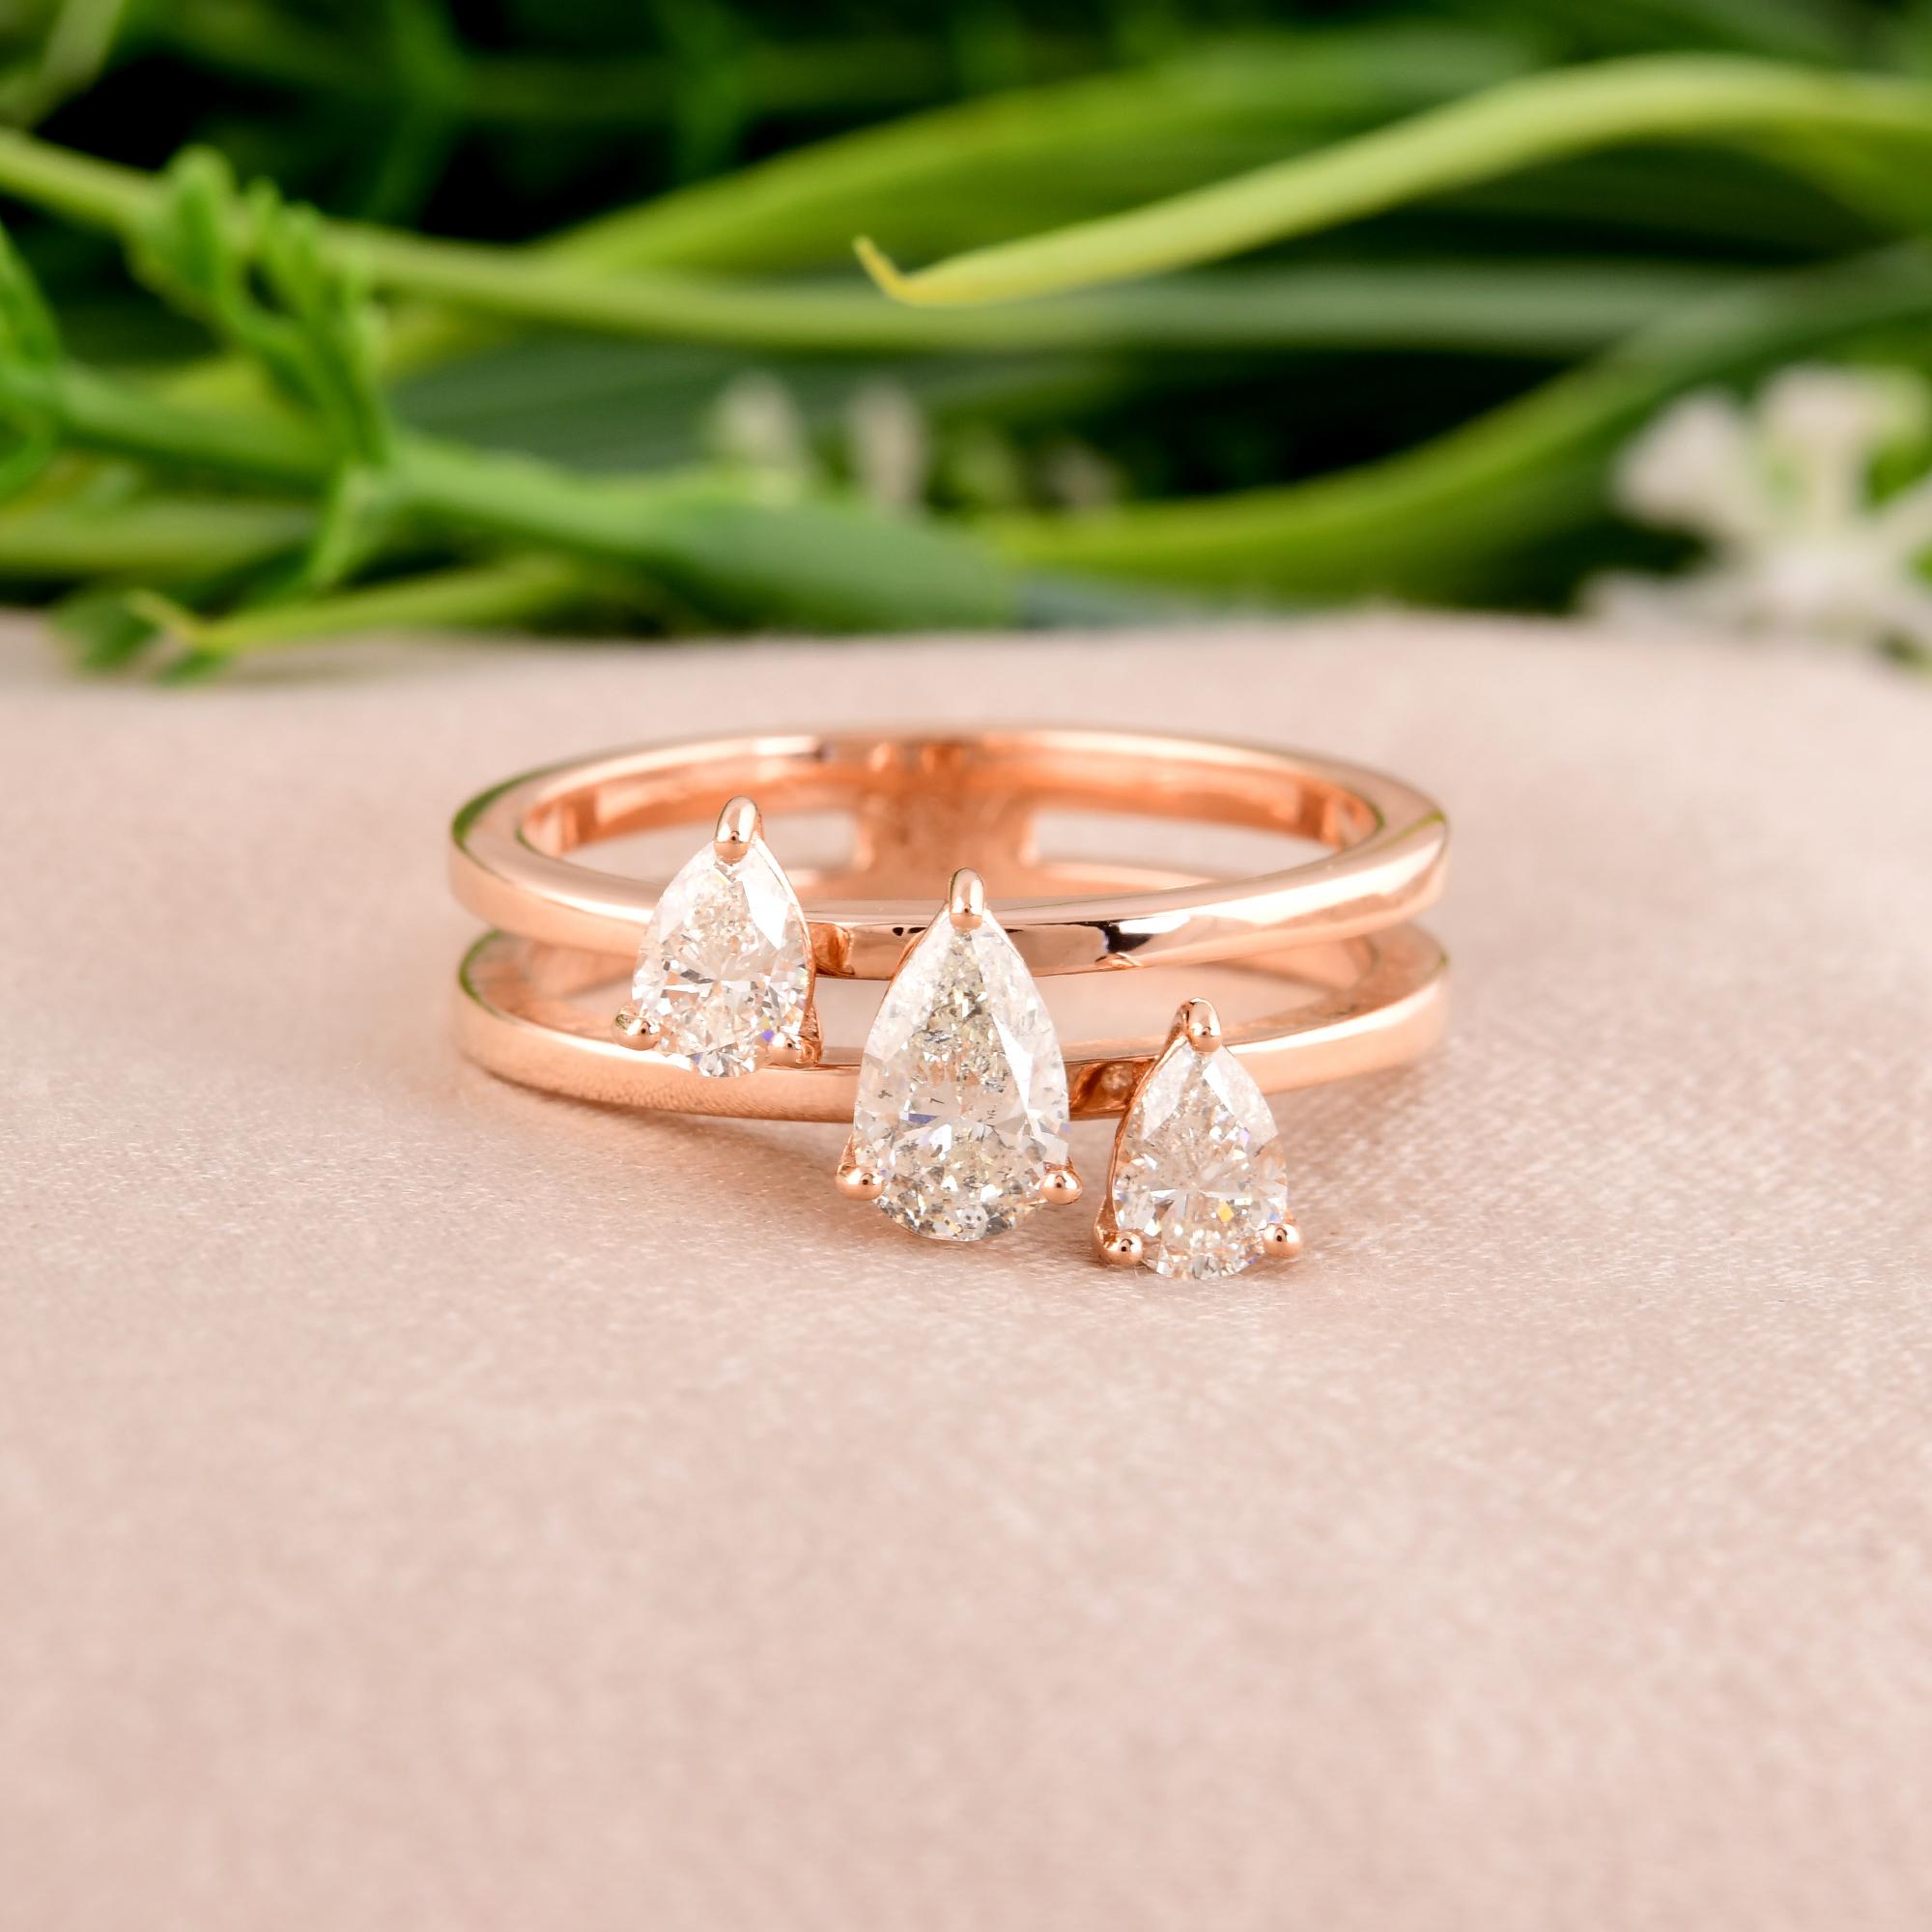 Set in a band of lustrous 18 Karat Rose Gold, this ring exudes warmth and romance, adding a touch of glamour to any occasion. The rose gold setting beautifully complements the brilliance of the diamond, creating a harmonious balance of color and